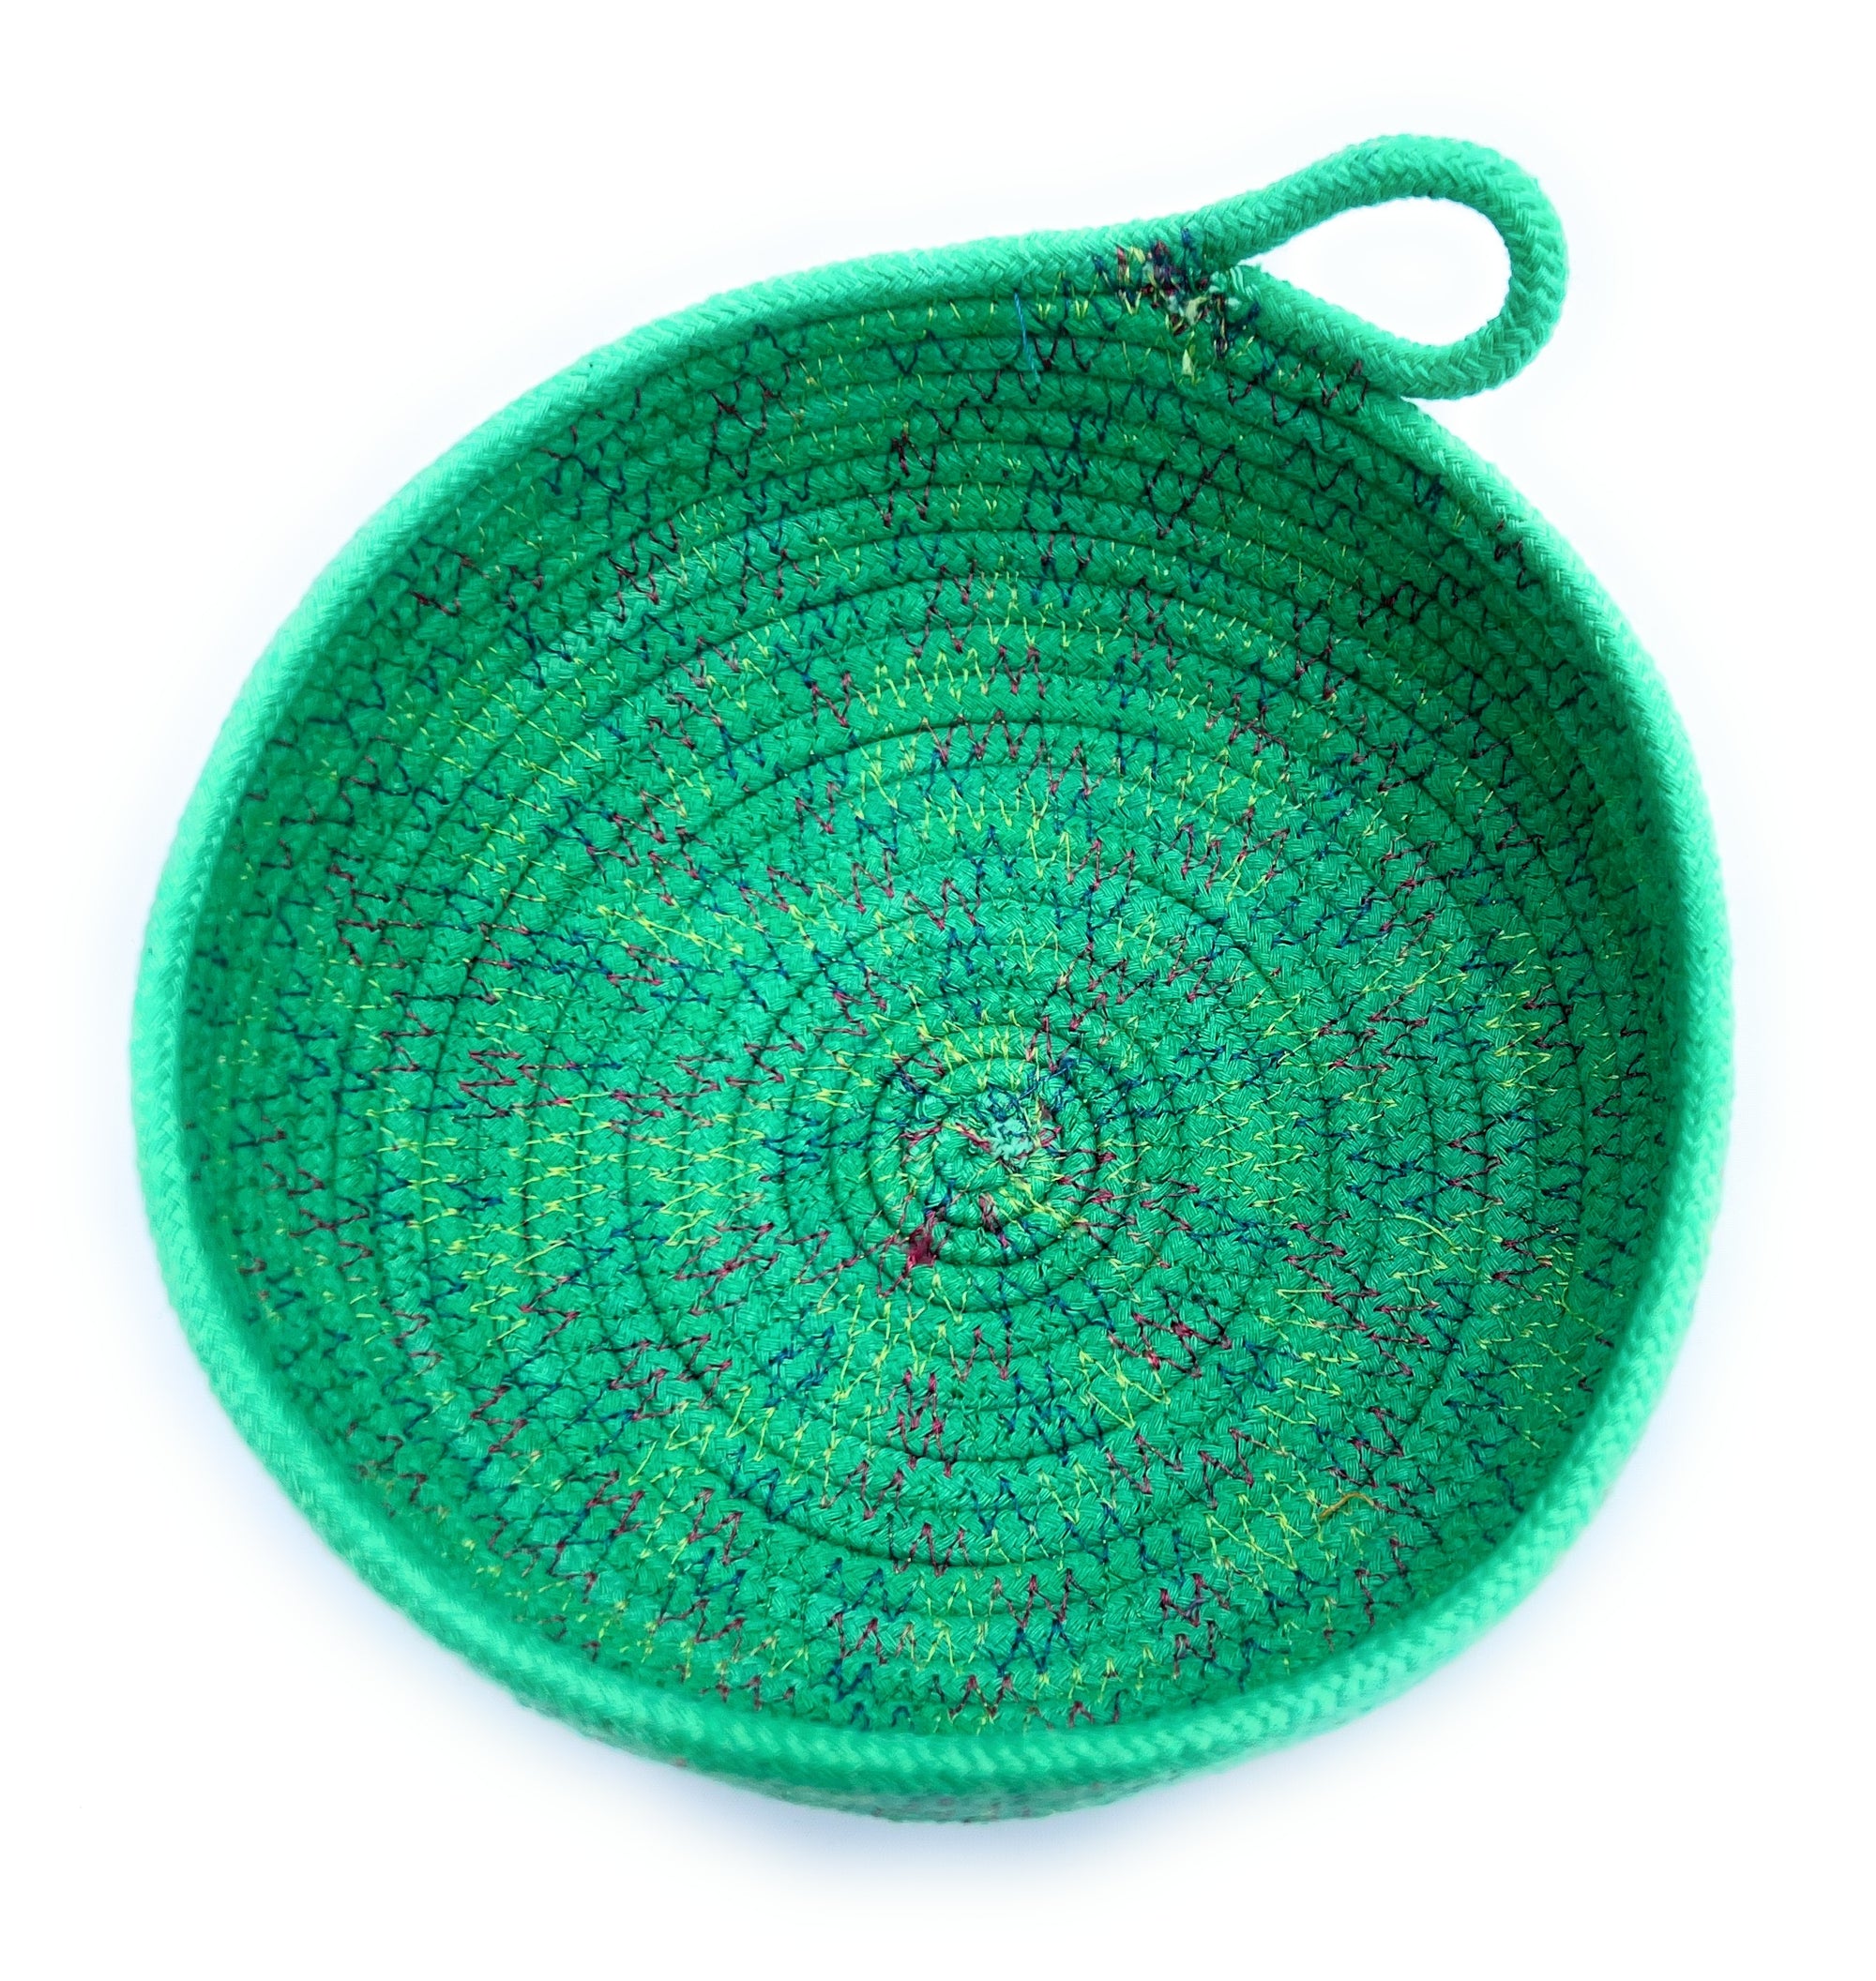 Coiled Rope Bowl Mint Julep Green